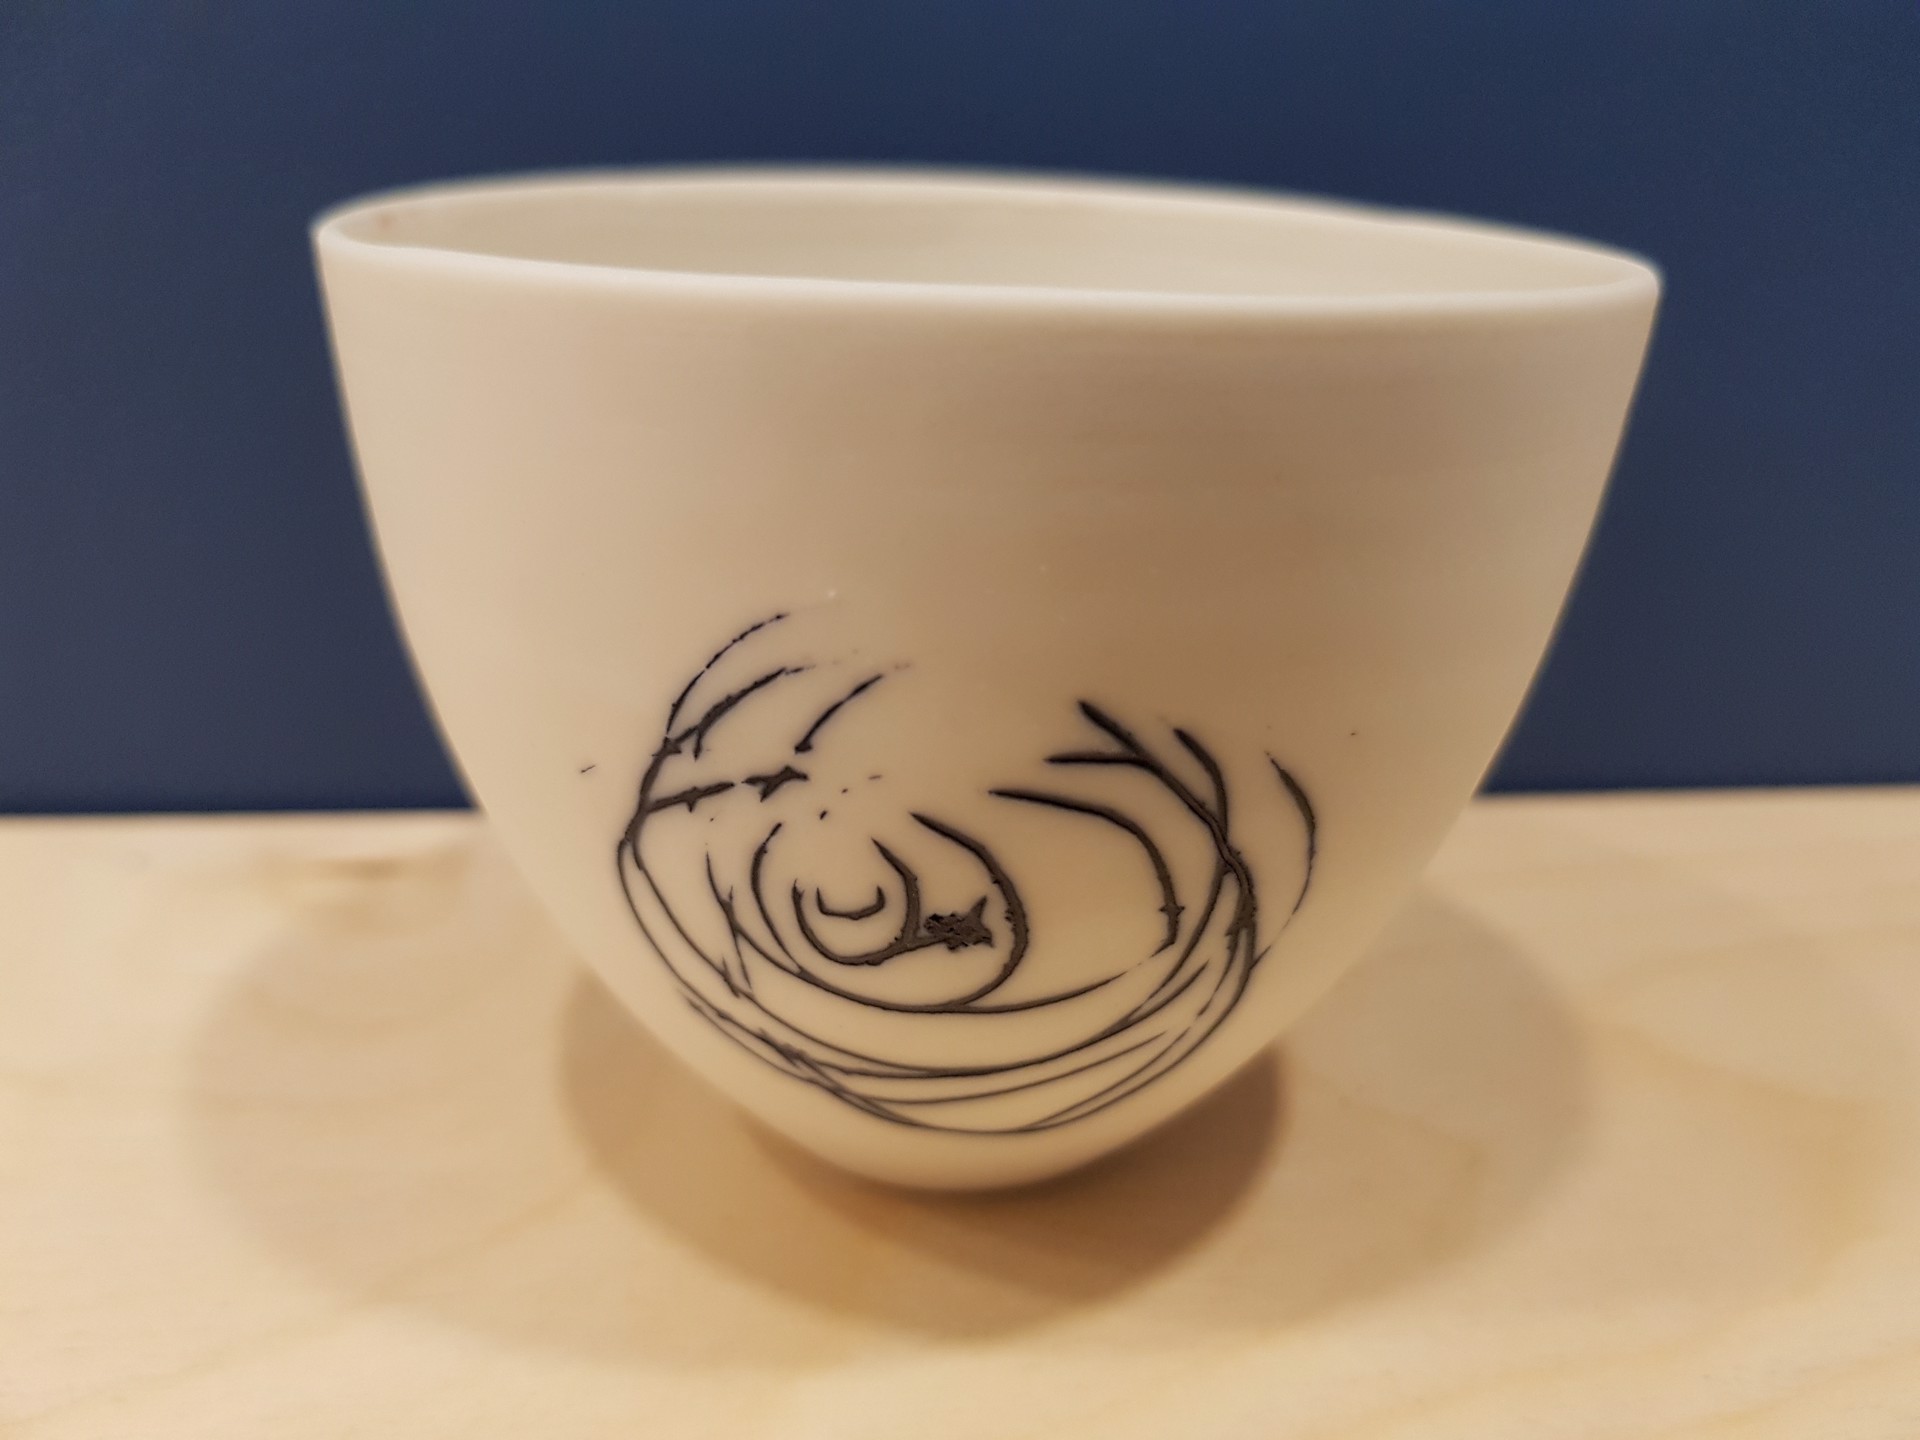 Small blue scribble bowl by Ali Tomlin